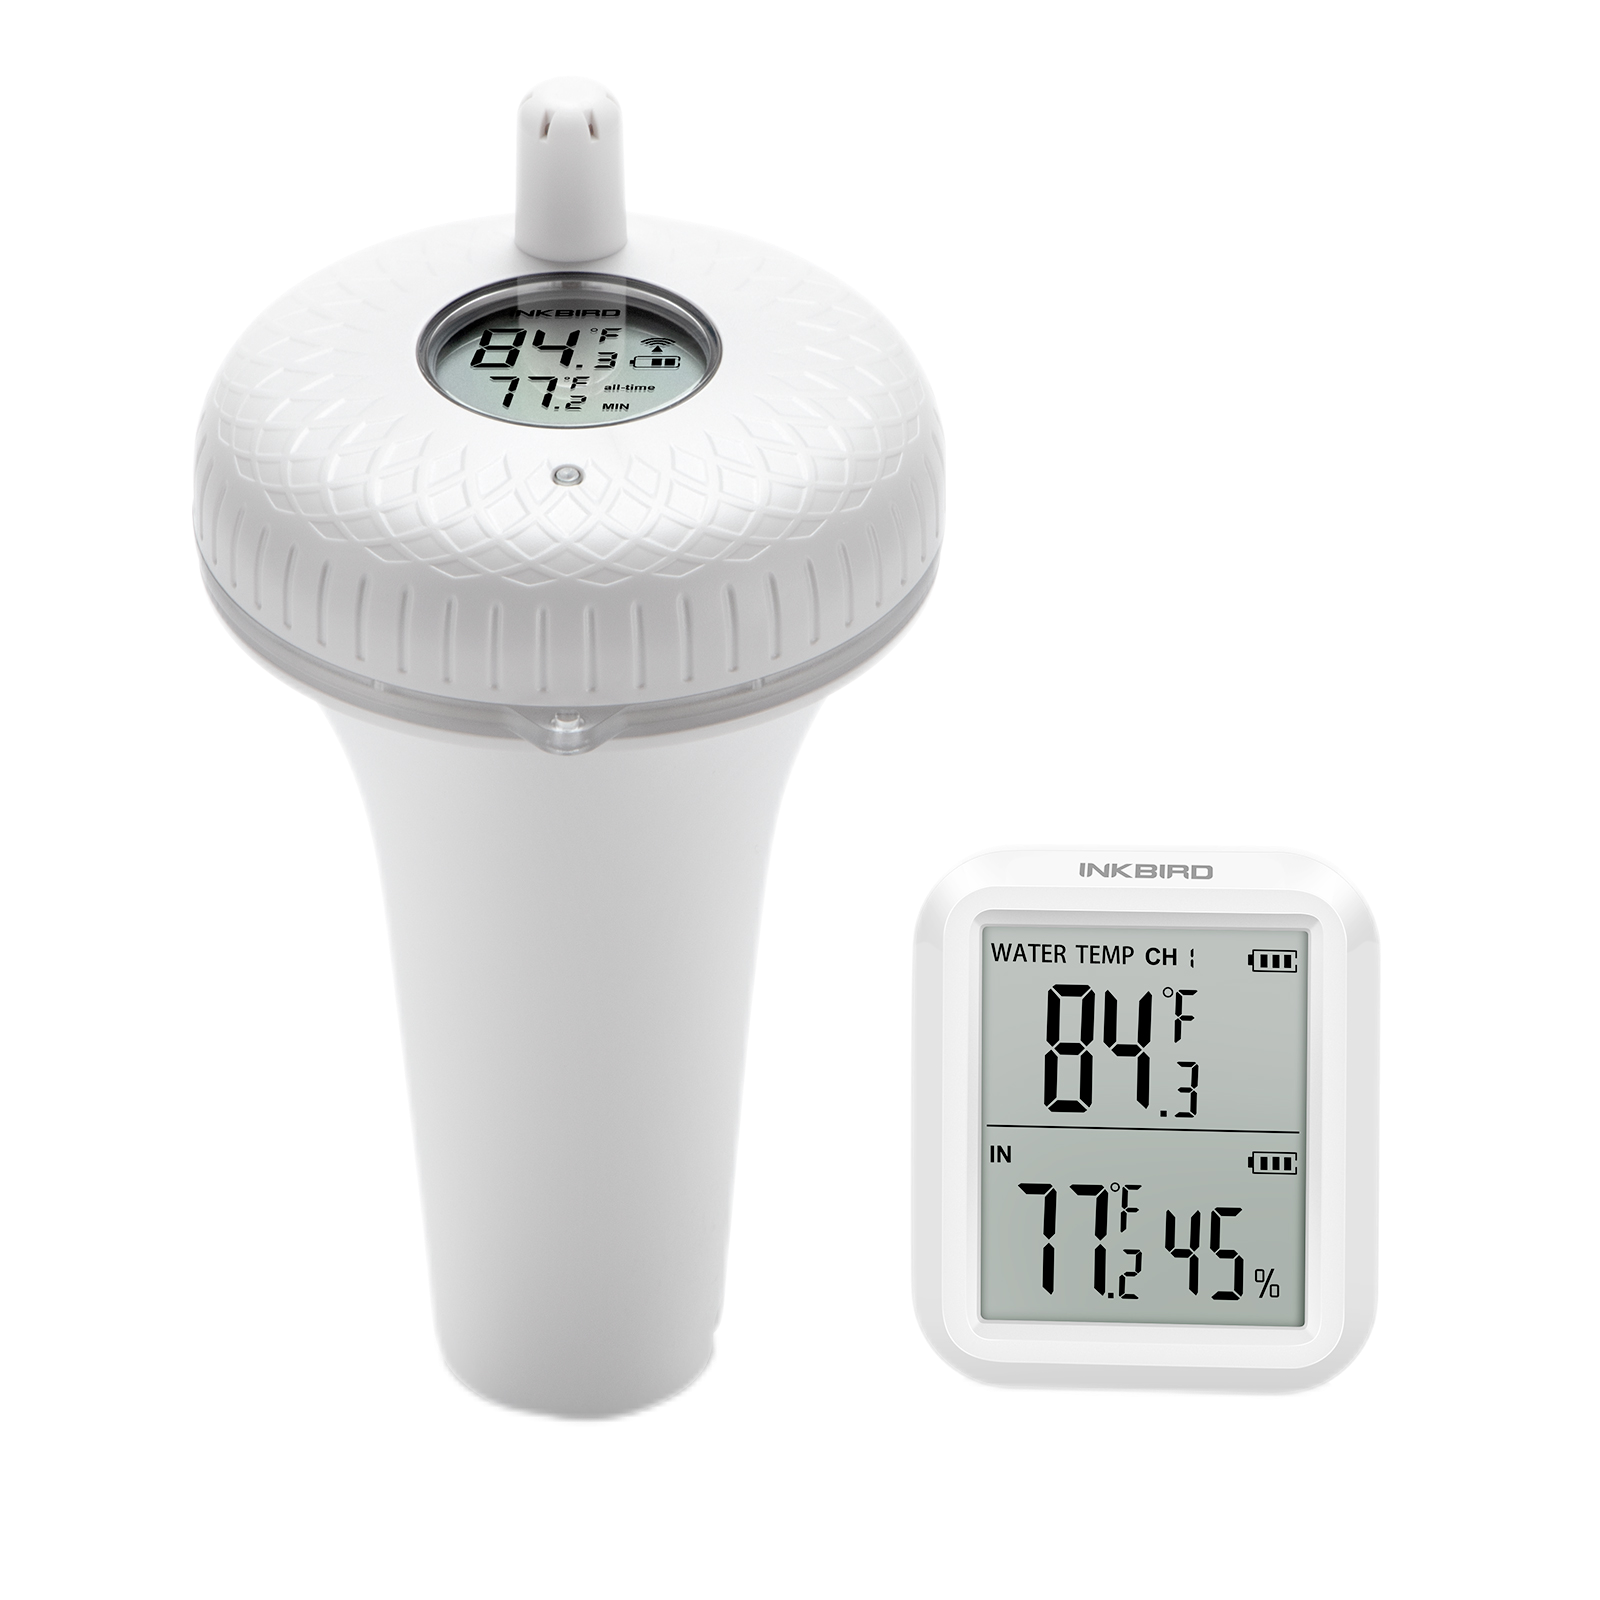 Floating Pool Mechanical Thermometer with String Water Temperature  Thermometer with Accurate Temperature Readings Perfect for Outdoor and  Indoor